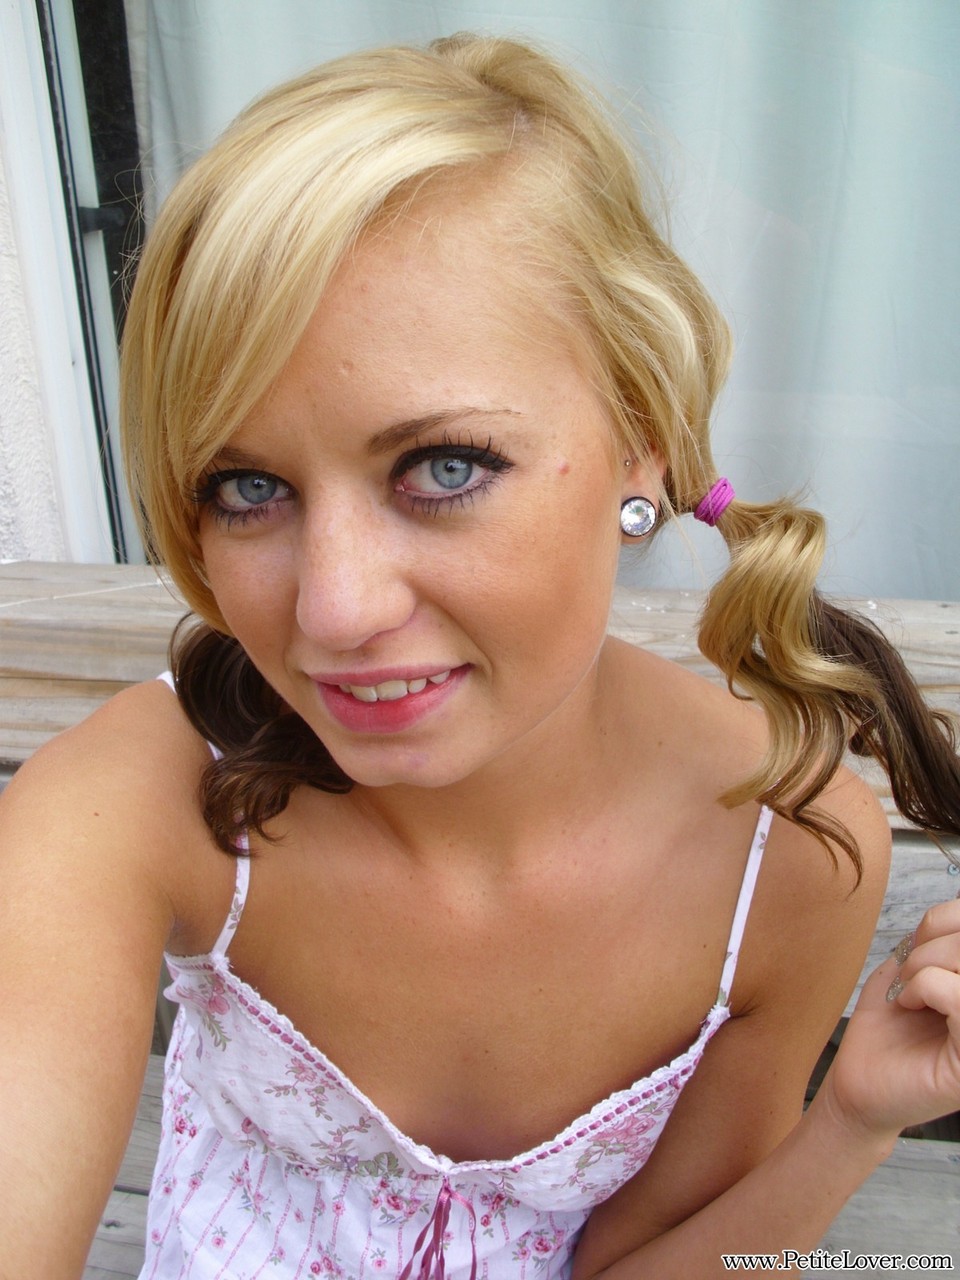 Cute blonde Tiff in pigtails showing off her wee small tits & tiny bald pussy foto porno #428478629 | Petite Lover Pics, Tiff, Amateur, porno ponsel